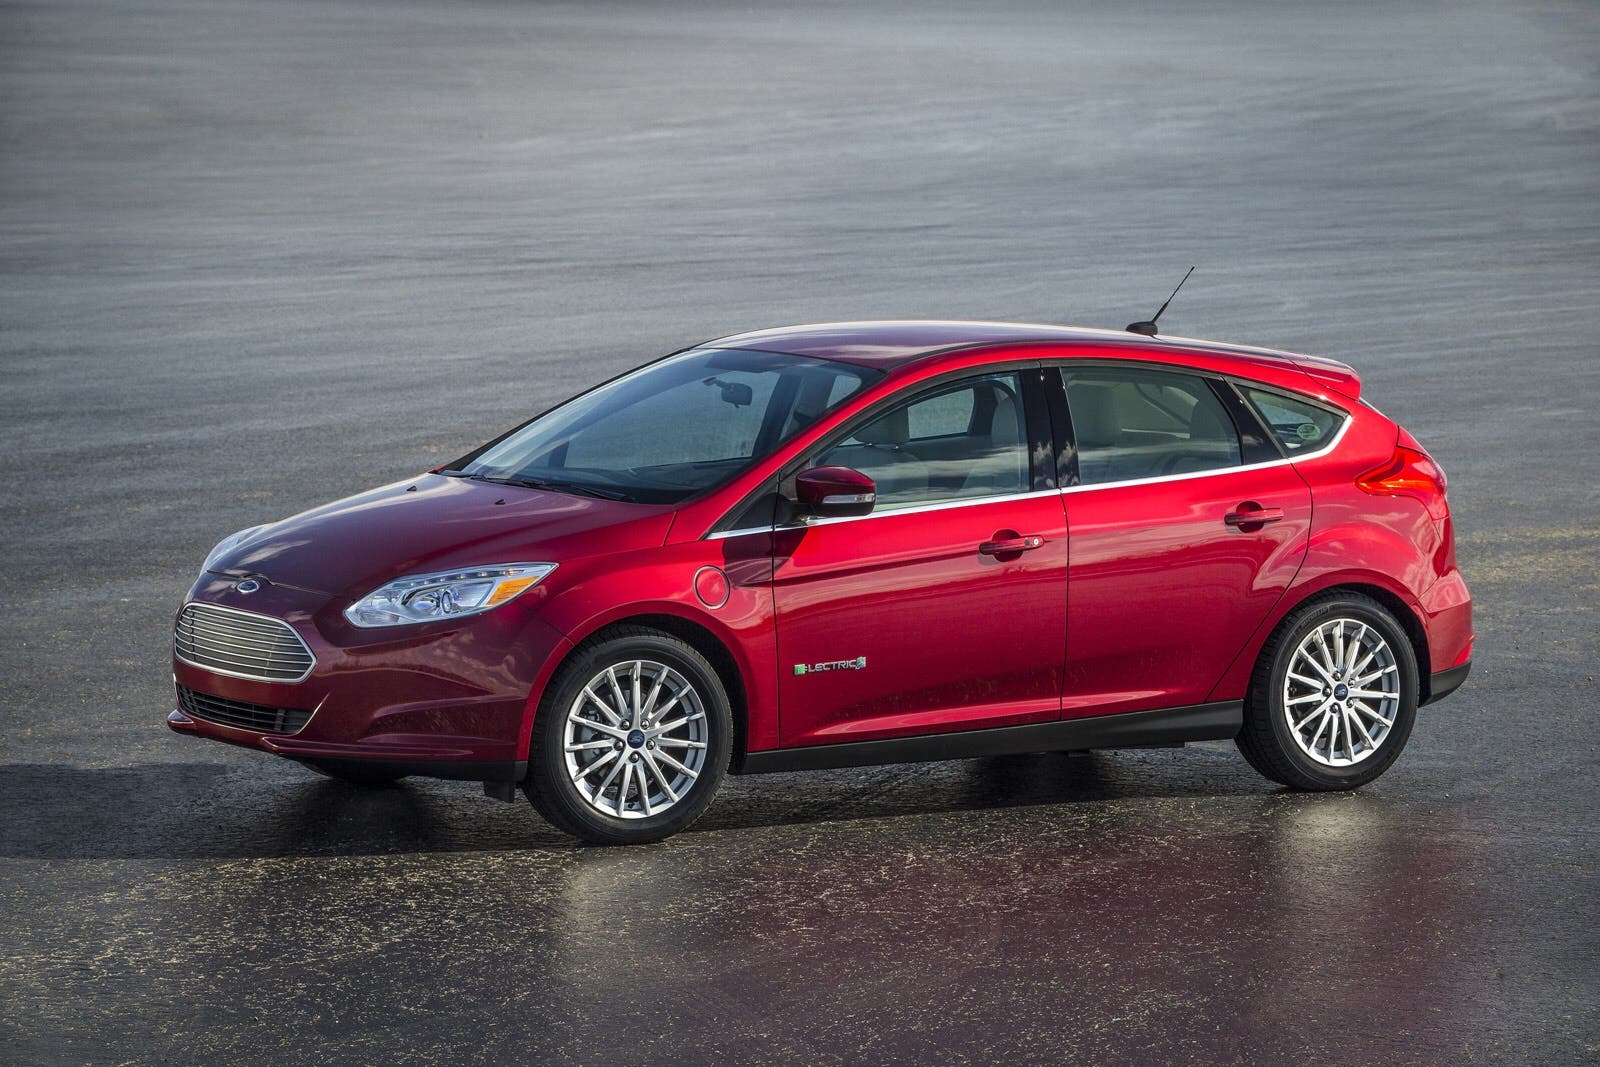 Ford Focus Electric 2015 Gets Big Price Cut - Down To $29,995 From $35,995  - CleanTechnica